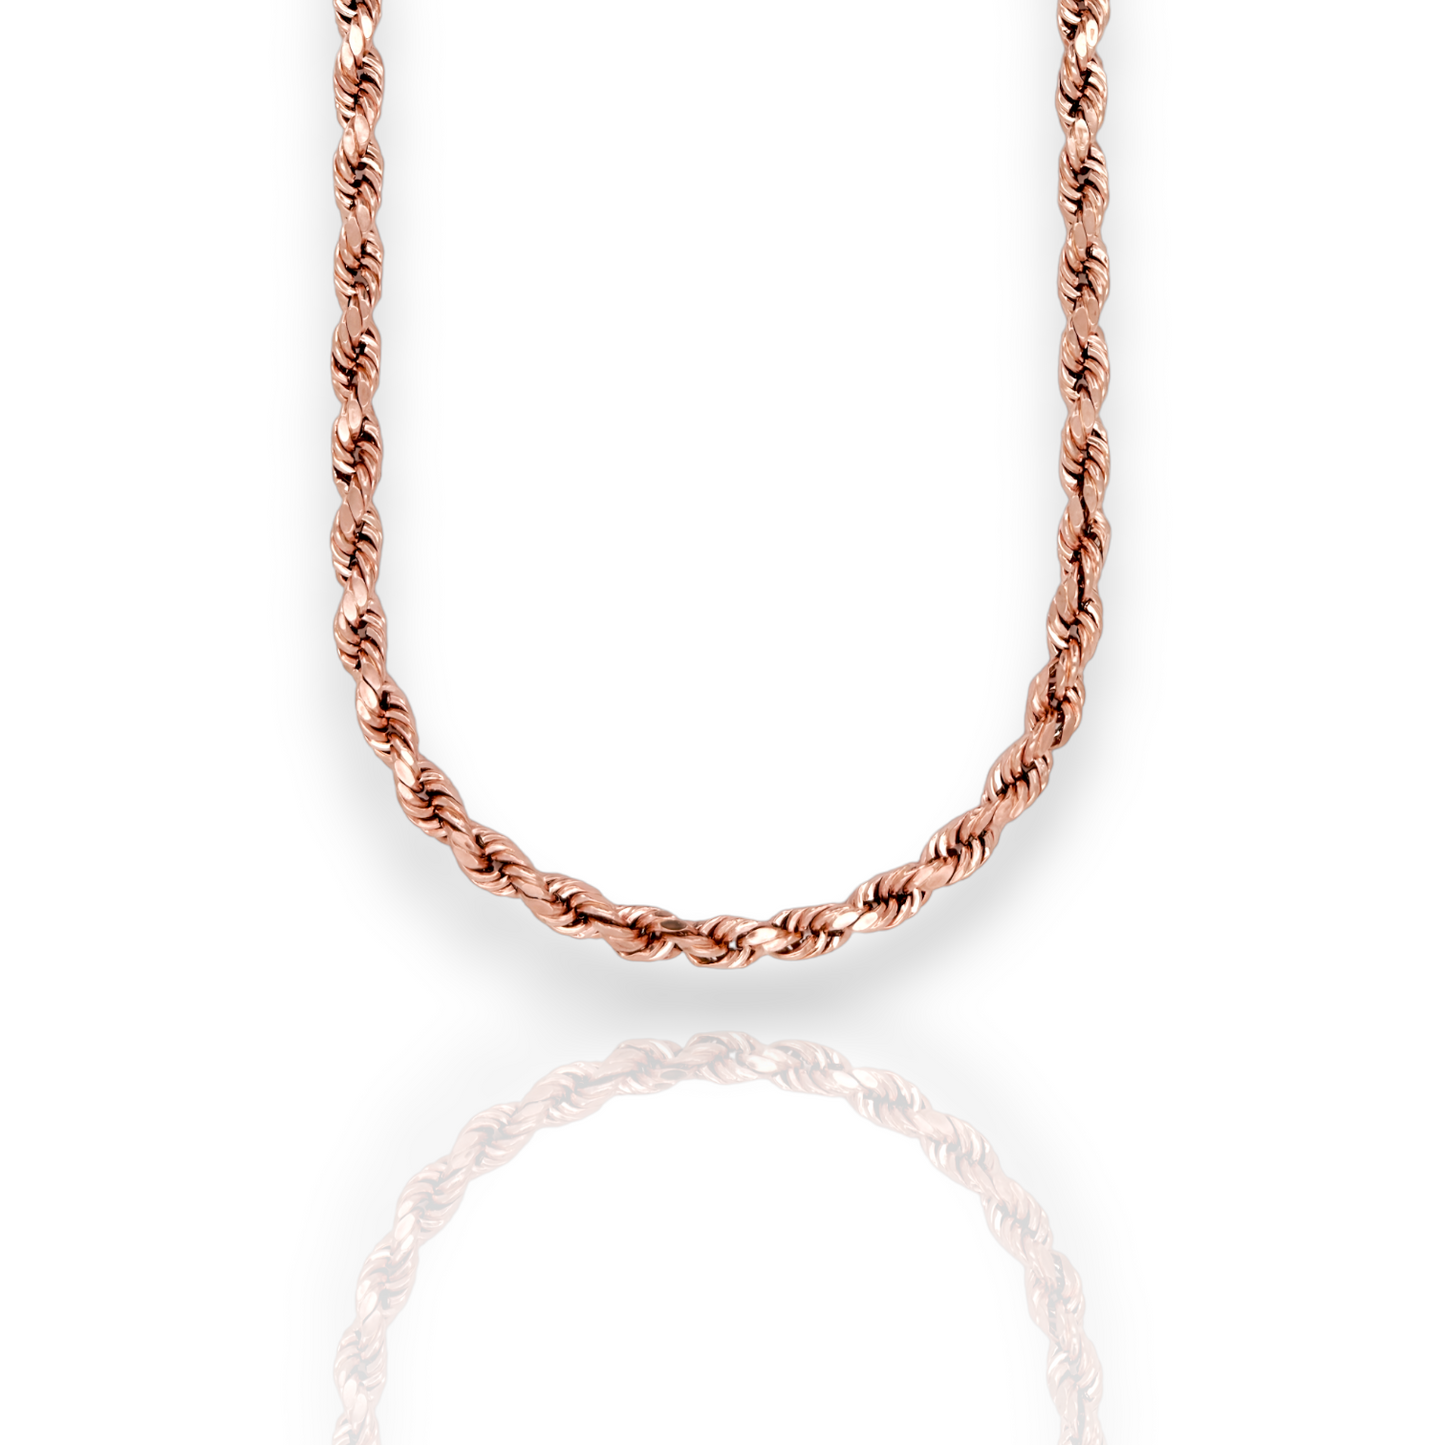 Rope Chain Necklace - 10K Rose Gold - Solid